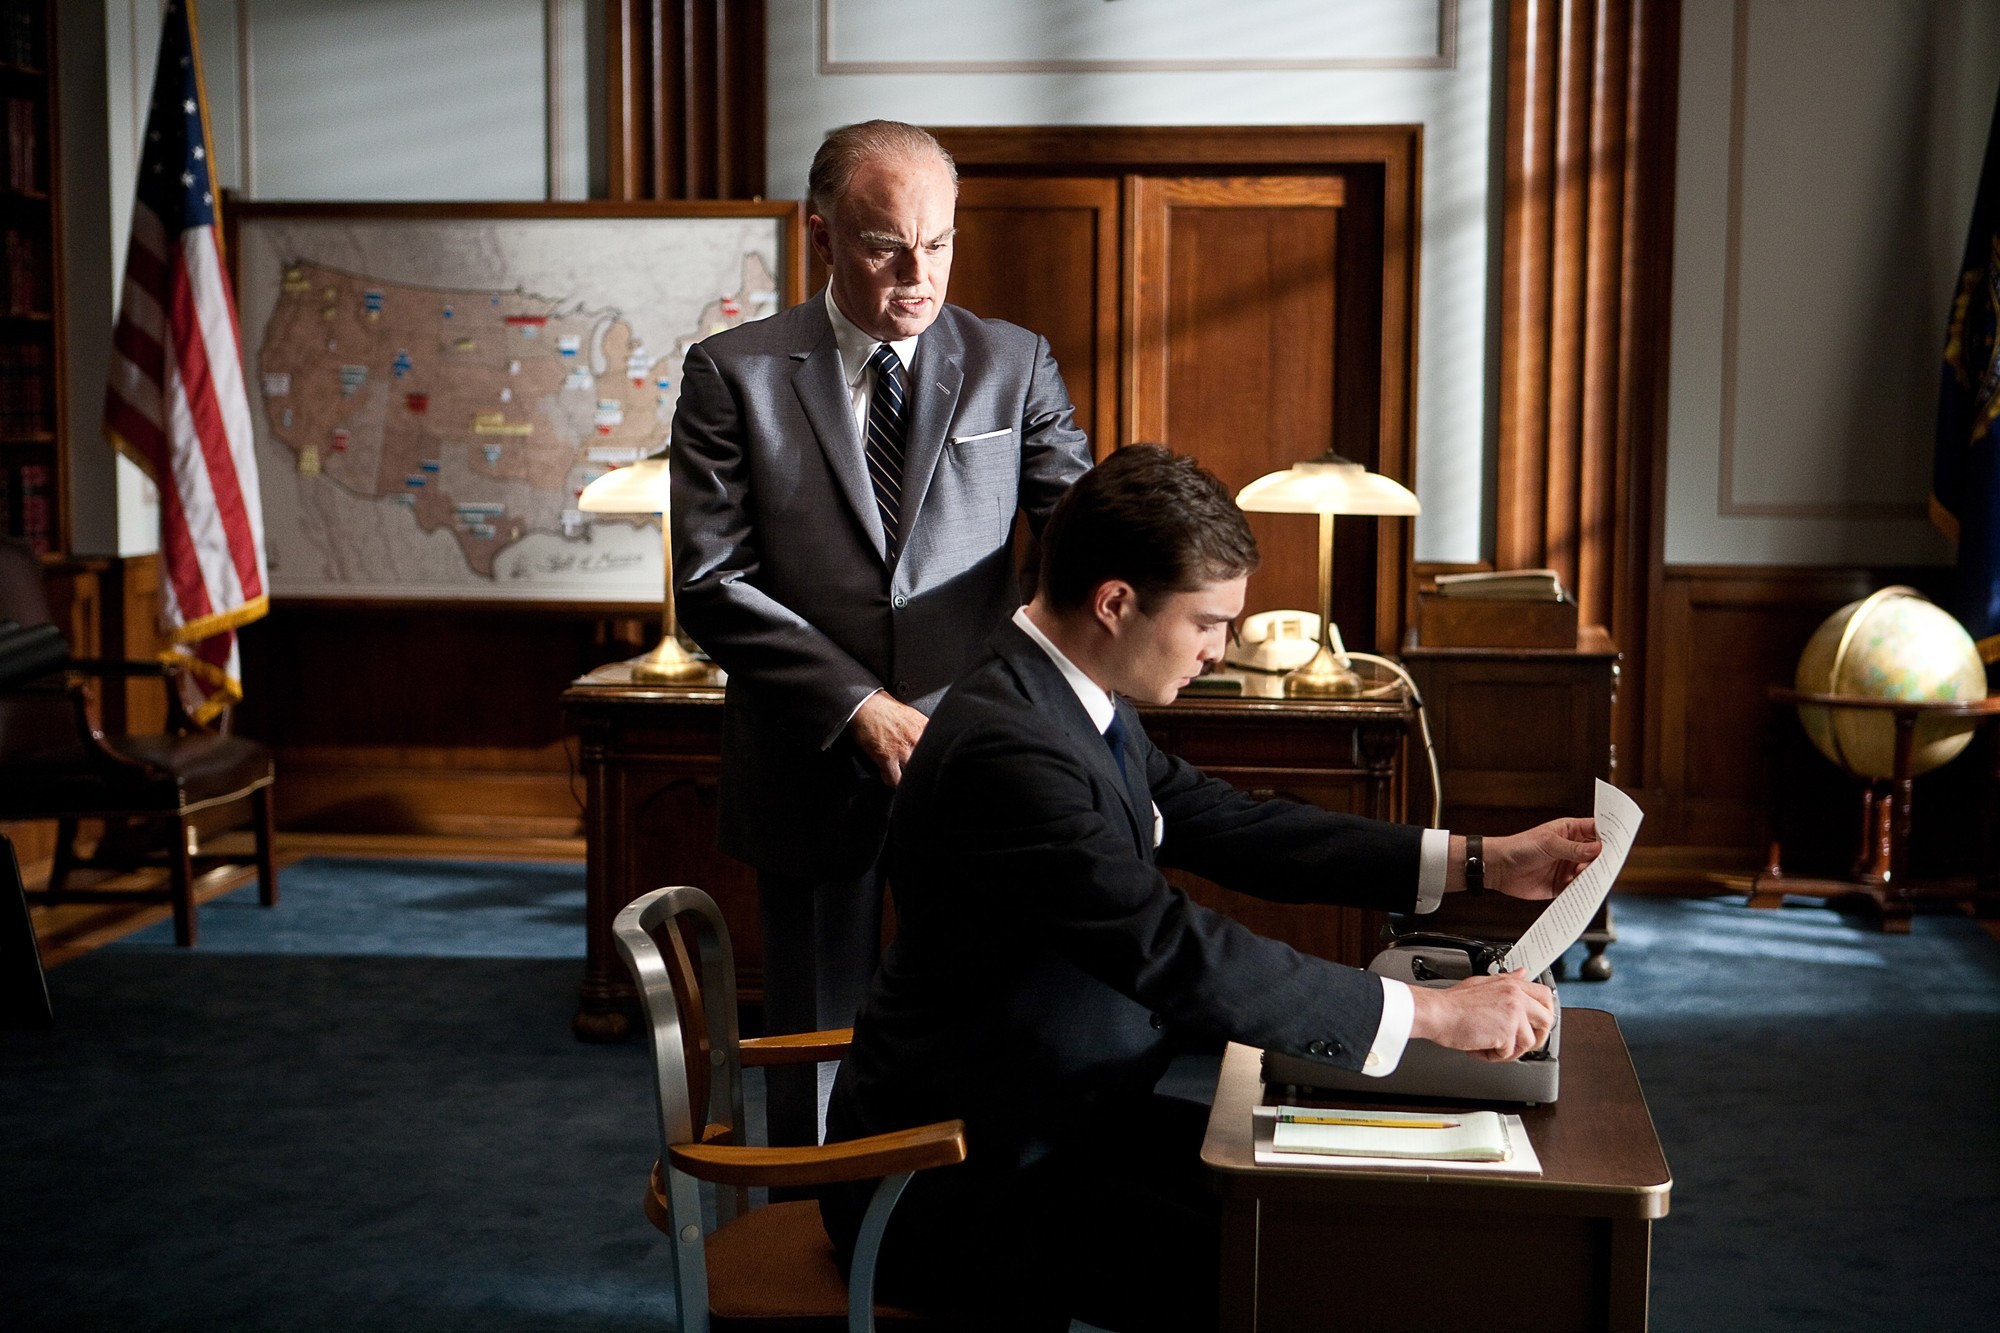 Leonardo DiCaprio stars as J. Edgar Hoover and Ed Westwick stars as Agent Smith in Warner Bros. Pictures' J. Edgar (2011)